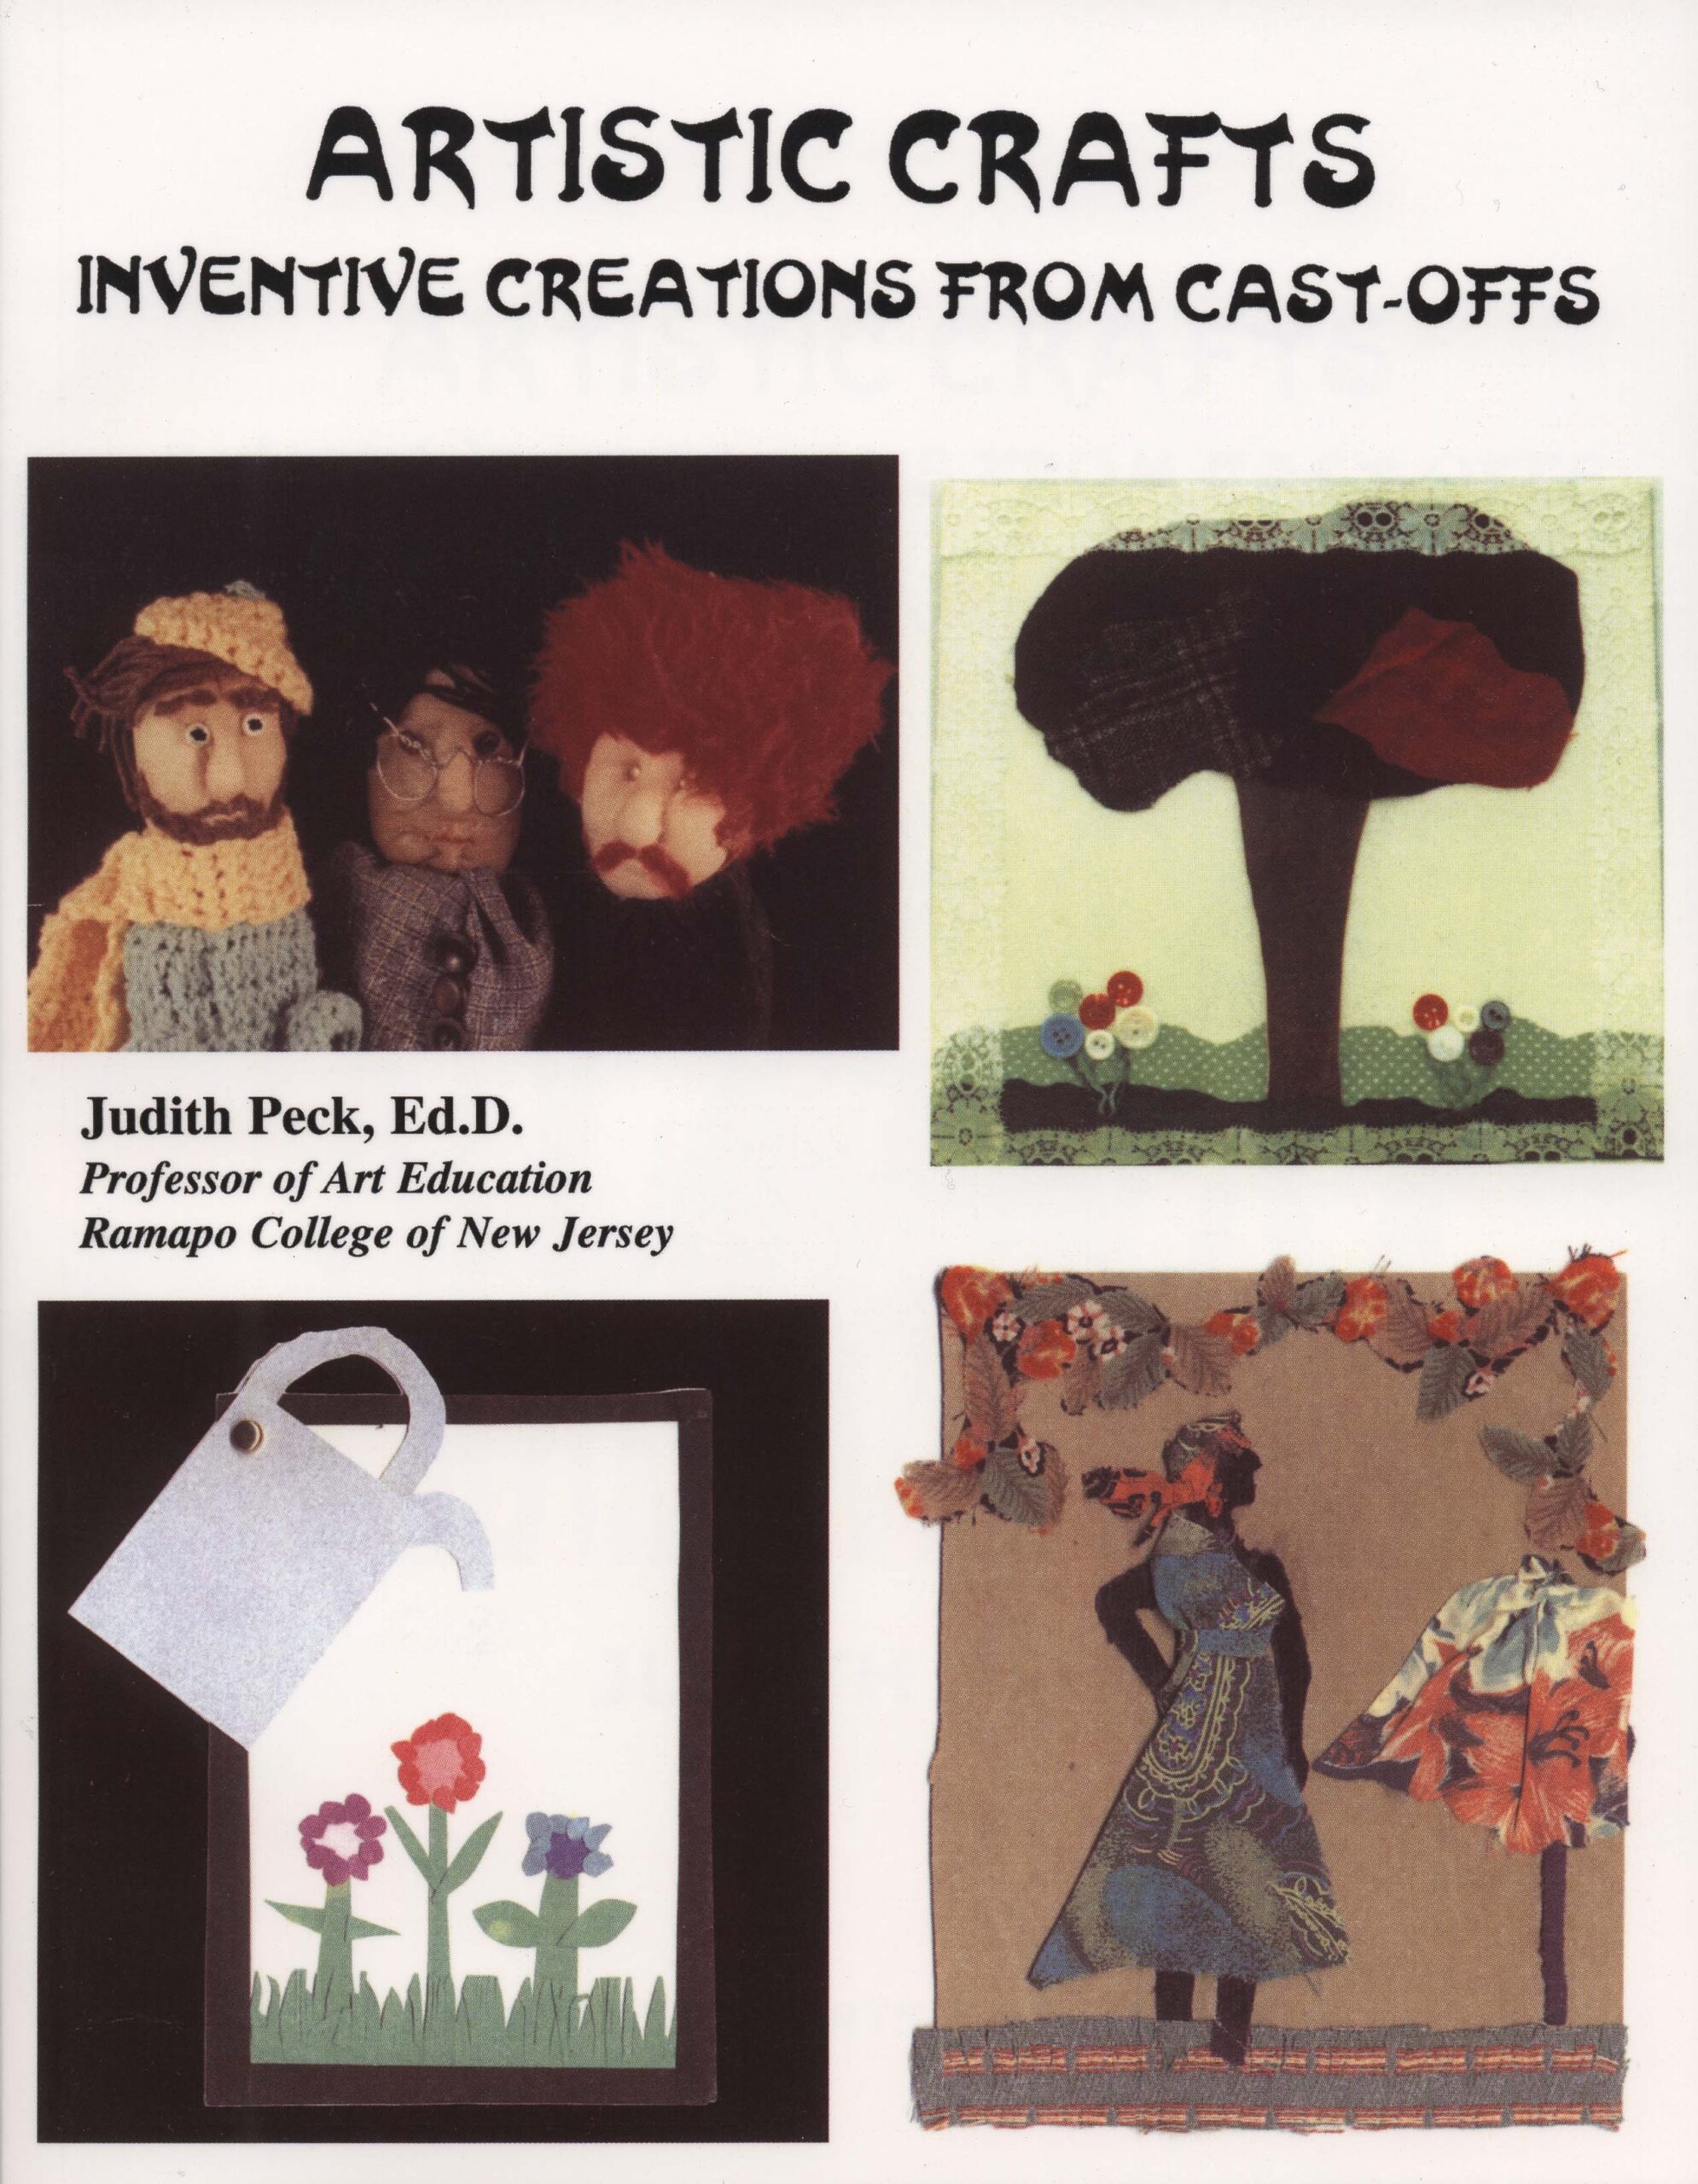 Artistic Crafts” Invented Creations with Cast-offs